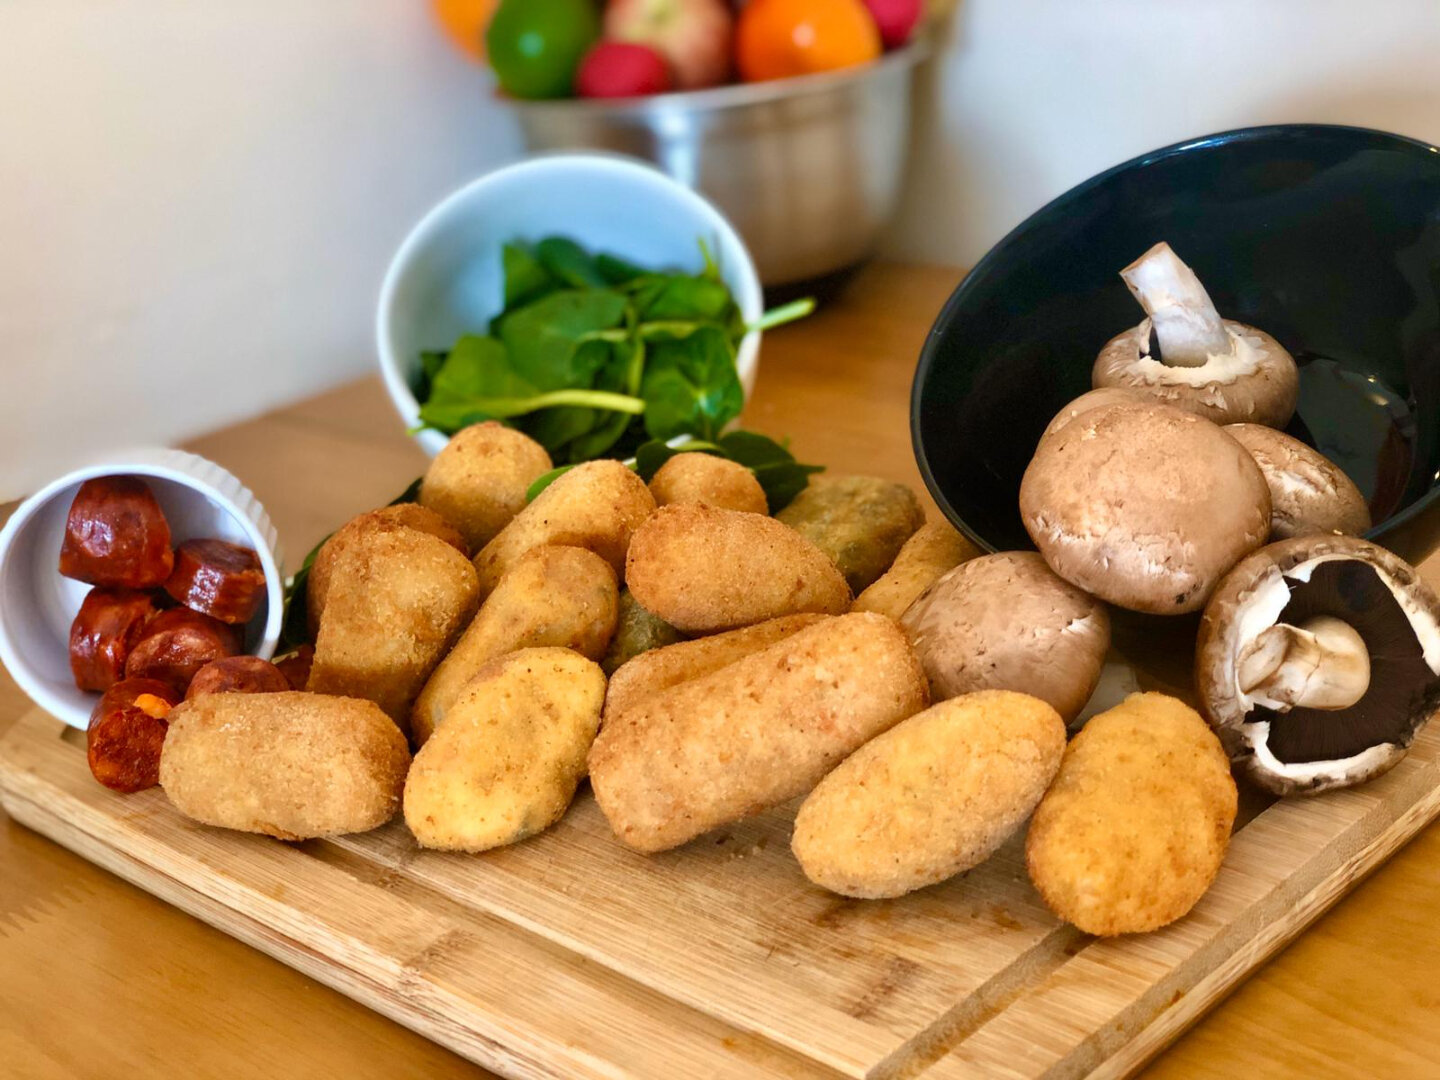 🌎 Croquettes Unite! Whether you call them croquetas, kroket, or kroketten, these crispy delights have a global fanbase. Share your favorite croquette variation in the comments! 🌍👇
.
.
.
.
.
#croquettes #foodieadventure #crispybites #spanishtapas #